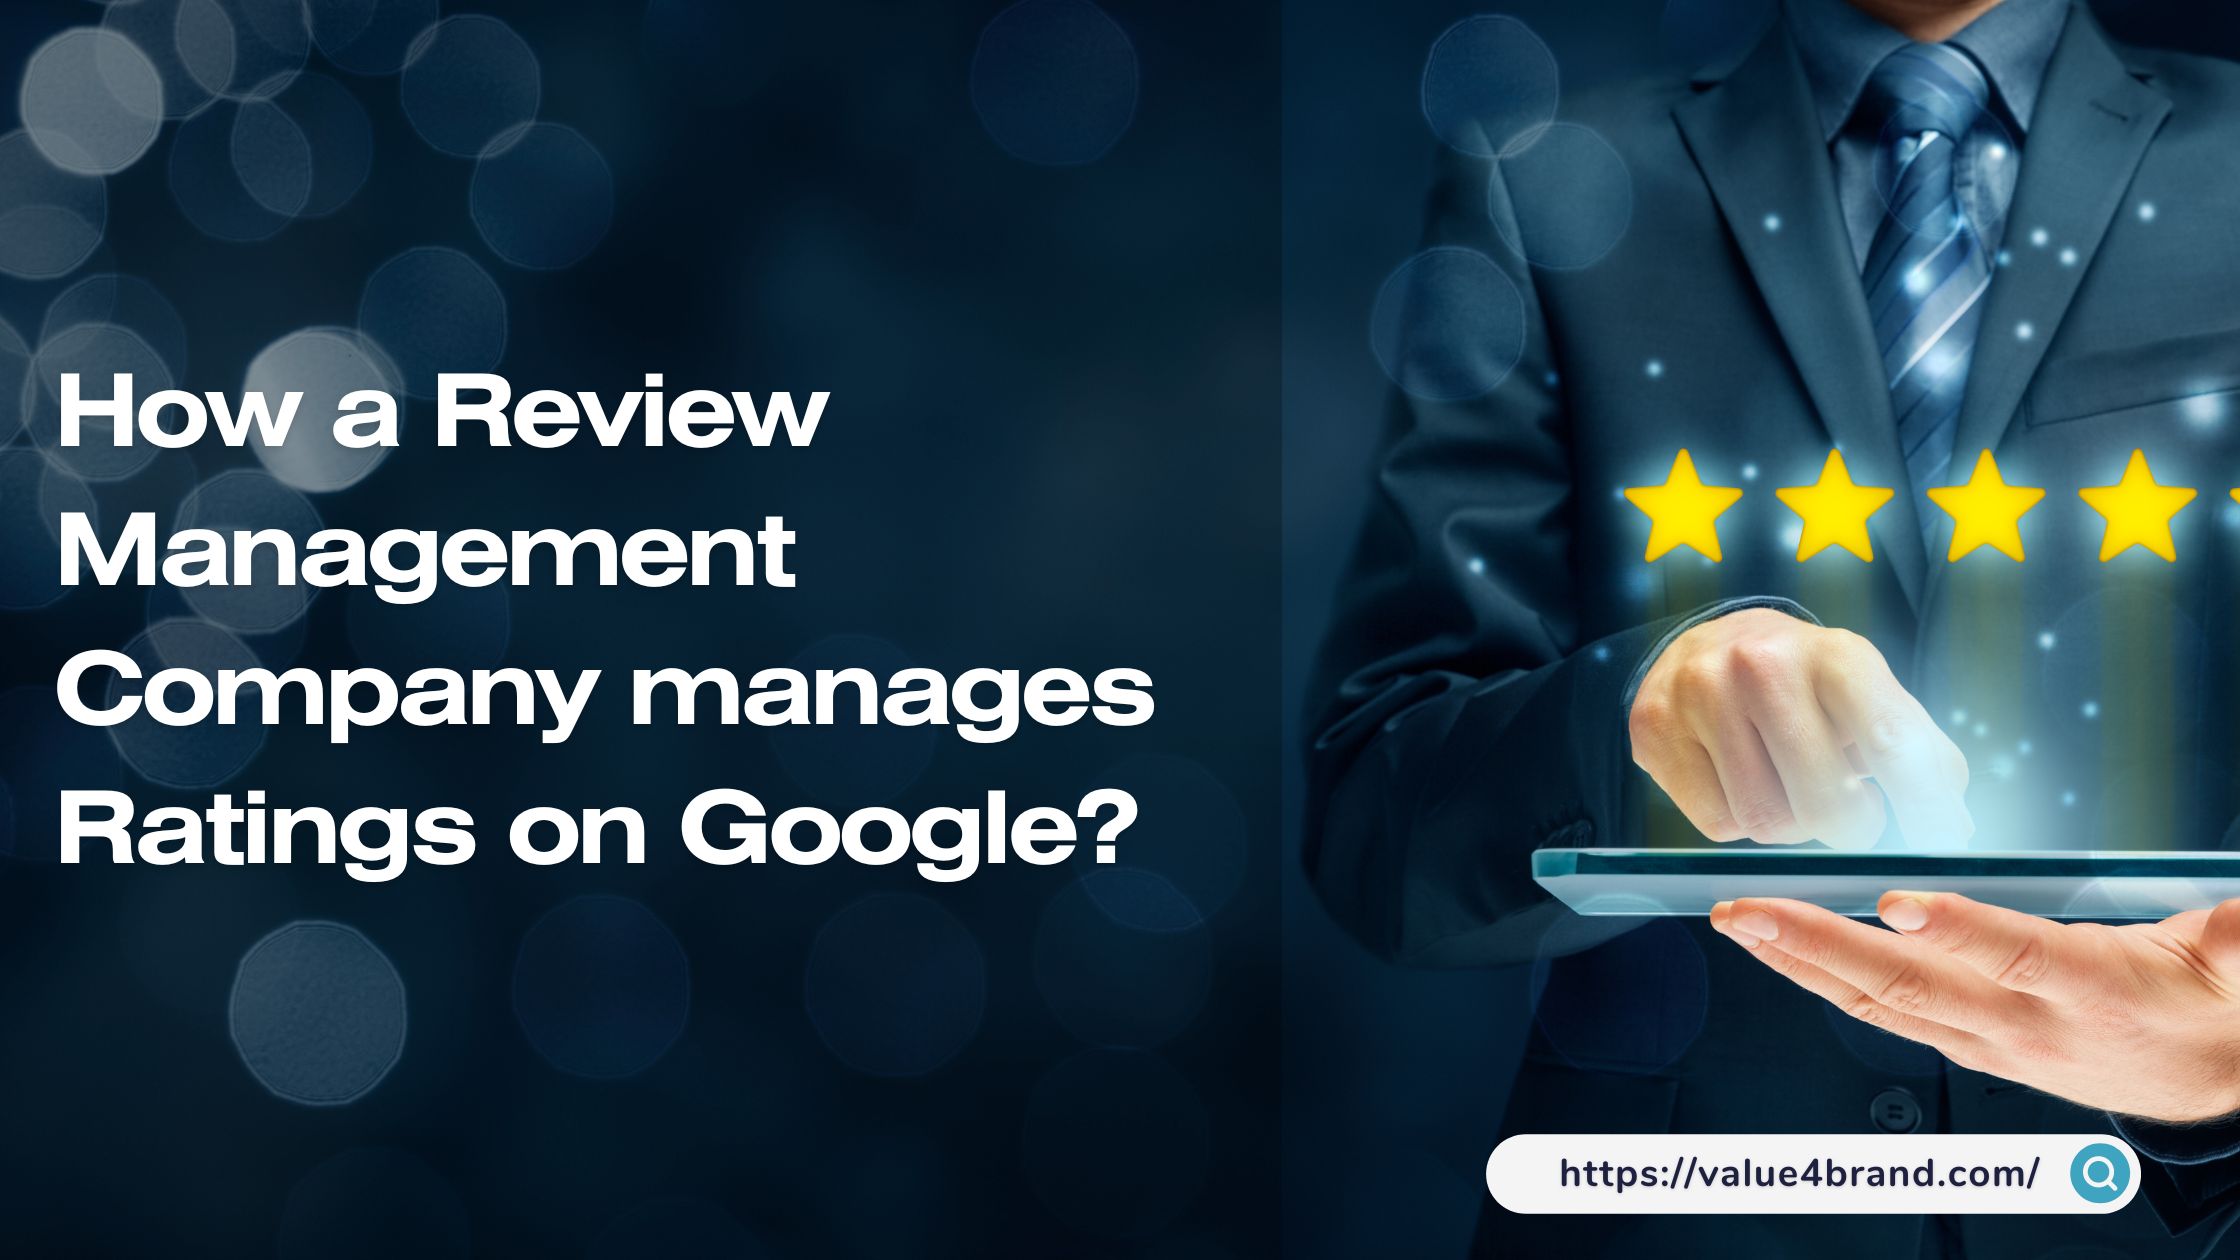 How a Review Management Company manages Ratings on Google